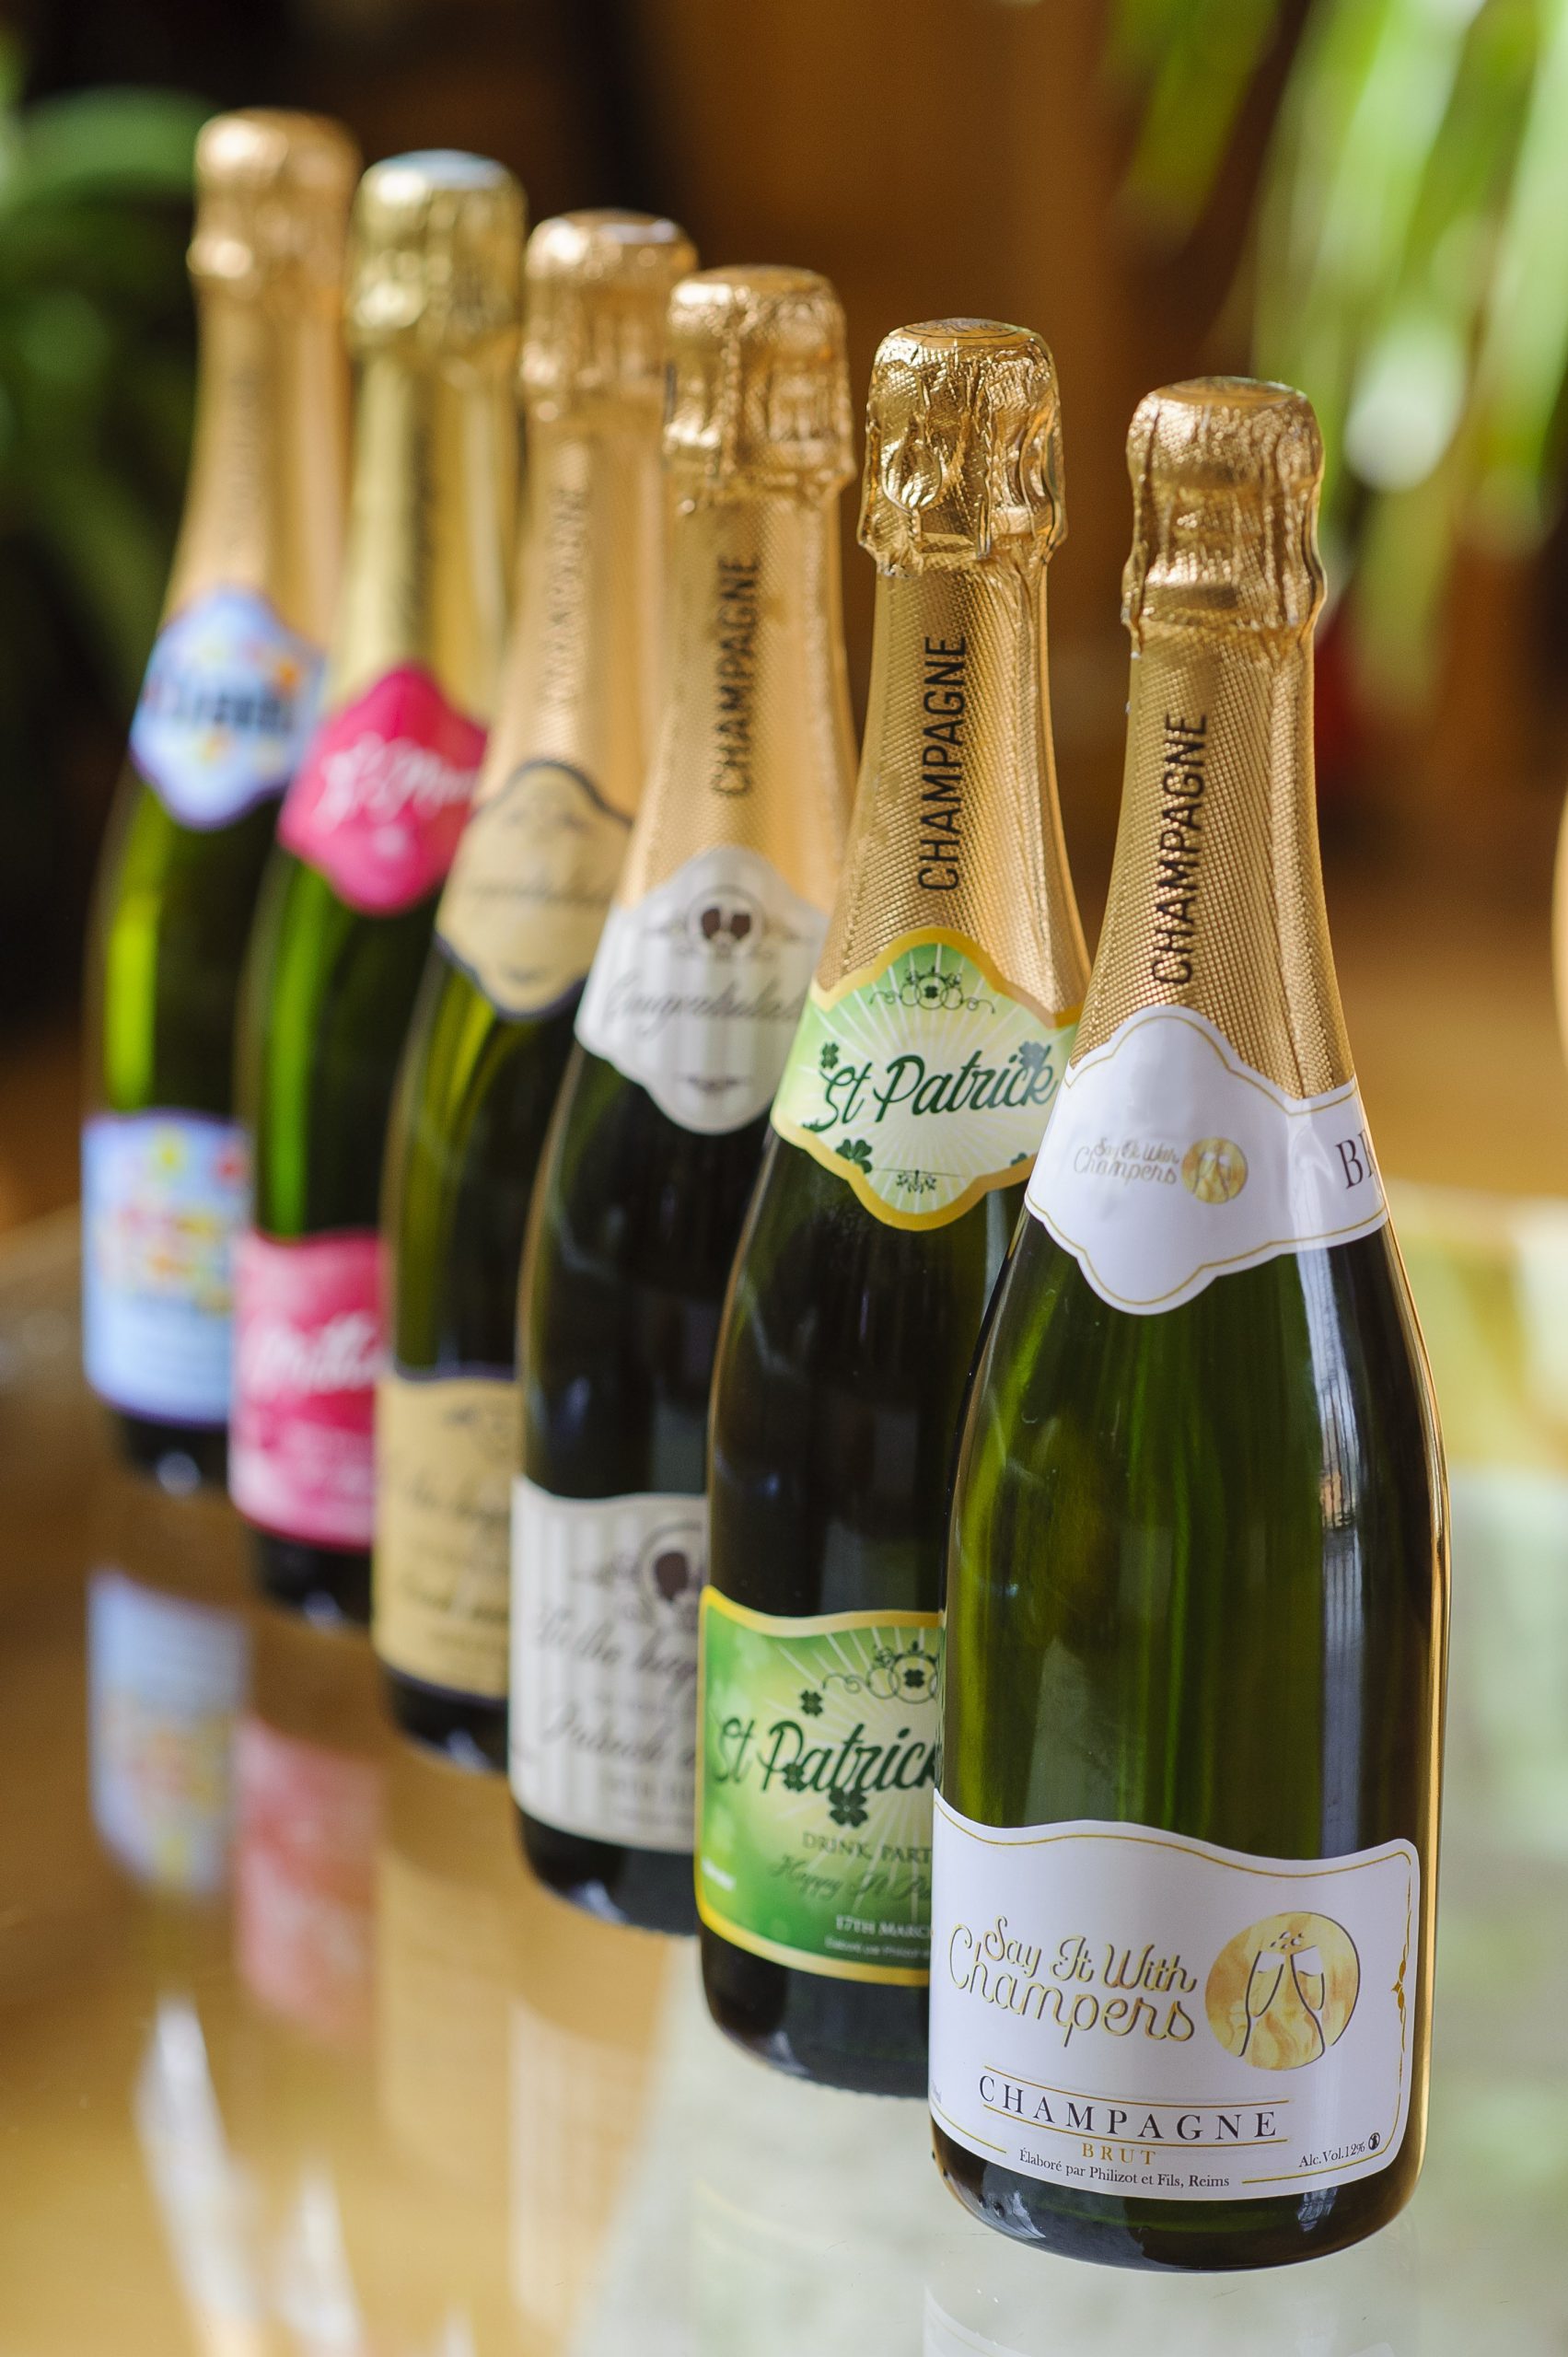 New Champagne Business is Launched